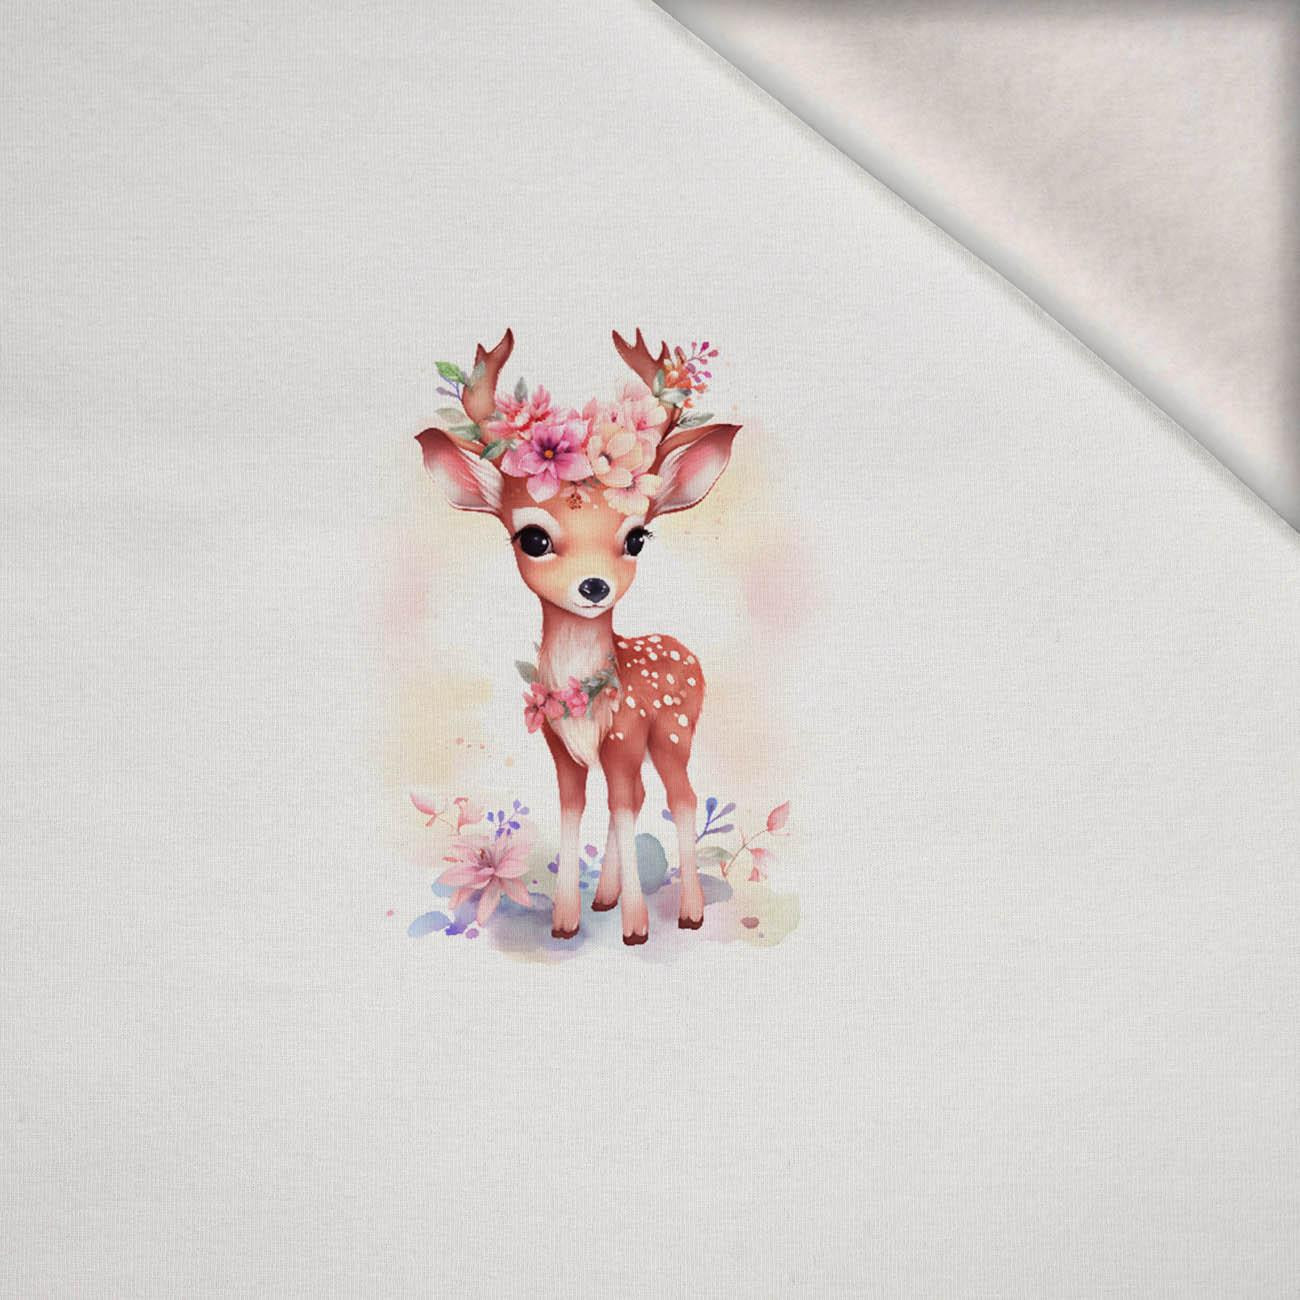 BABY DEER - panel (75cm x 80cm) brushed knitwear with elastane ITY